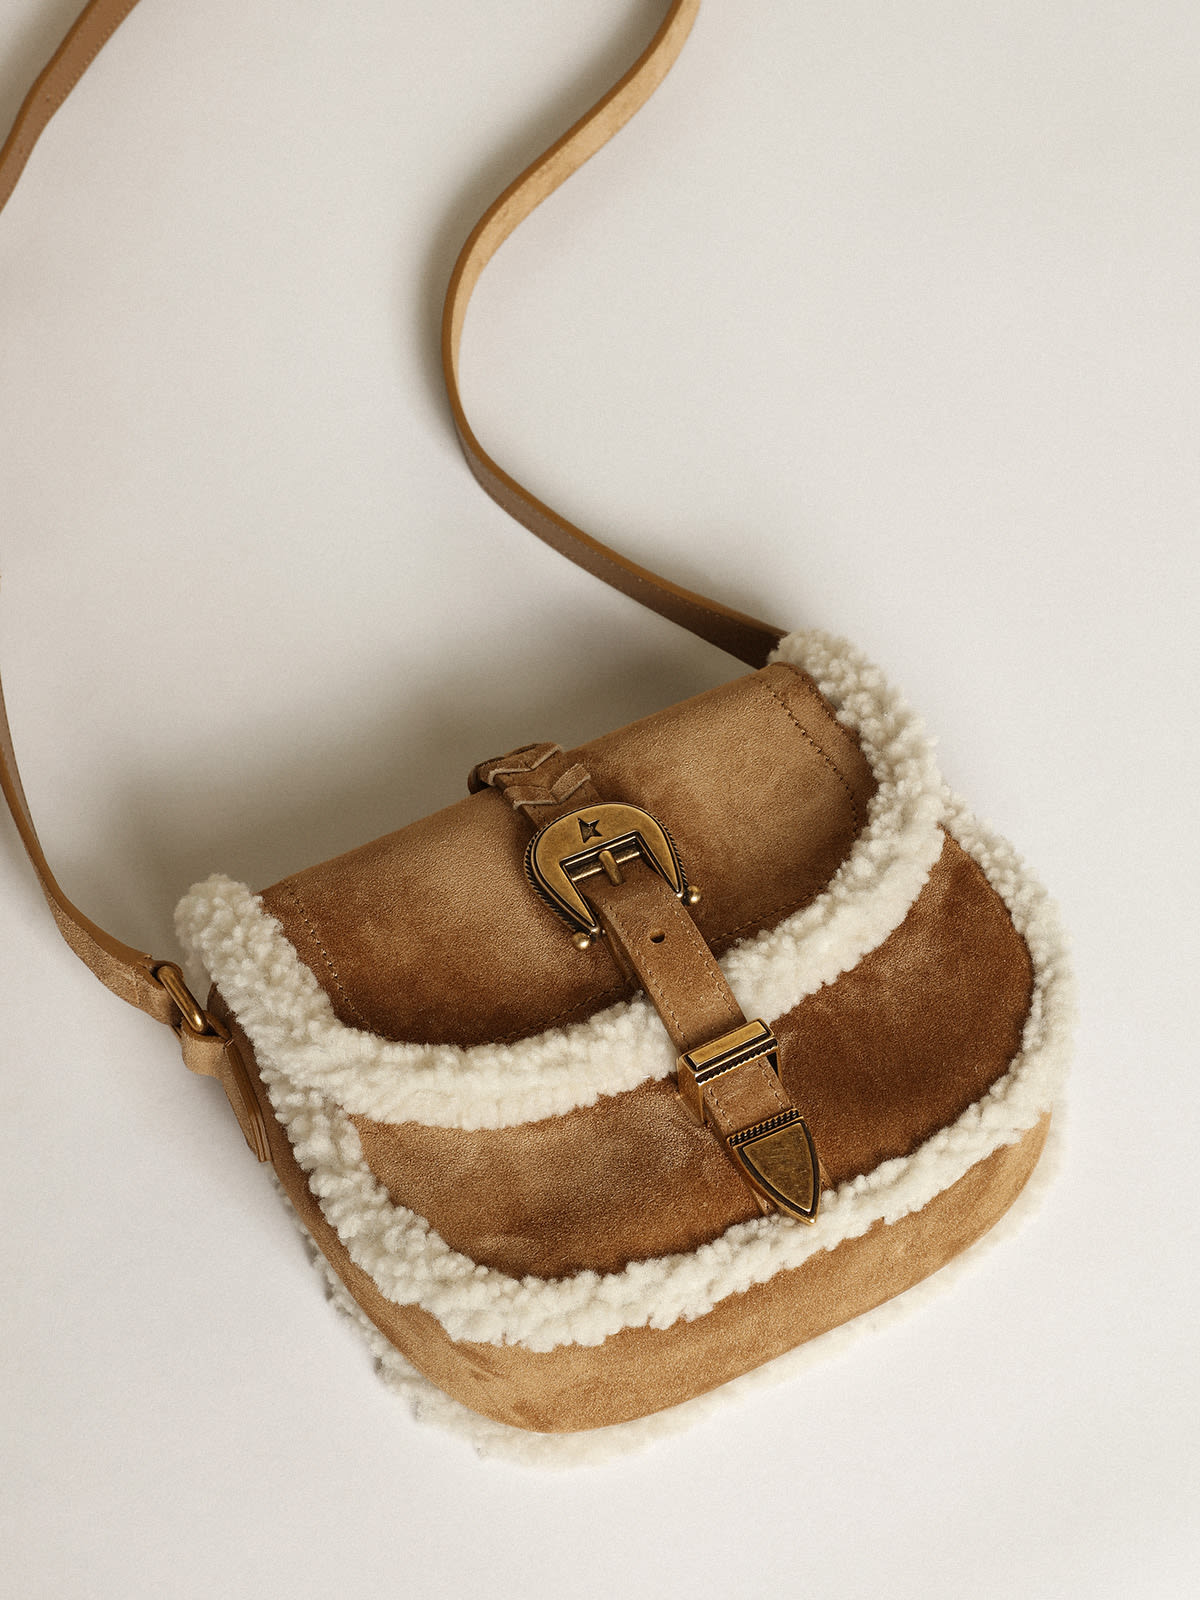 Golden Goose - Women's Rodeo Bag in suede with shearling details in 